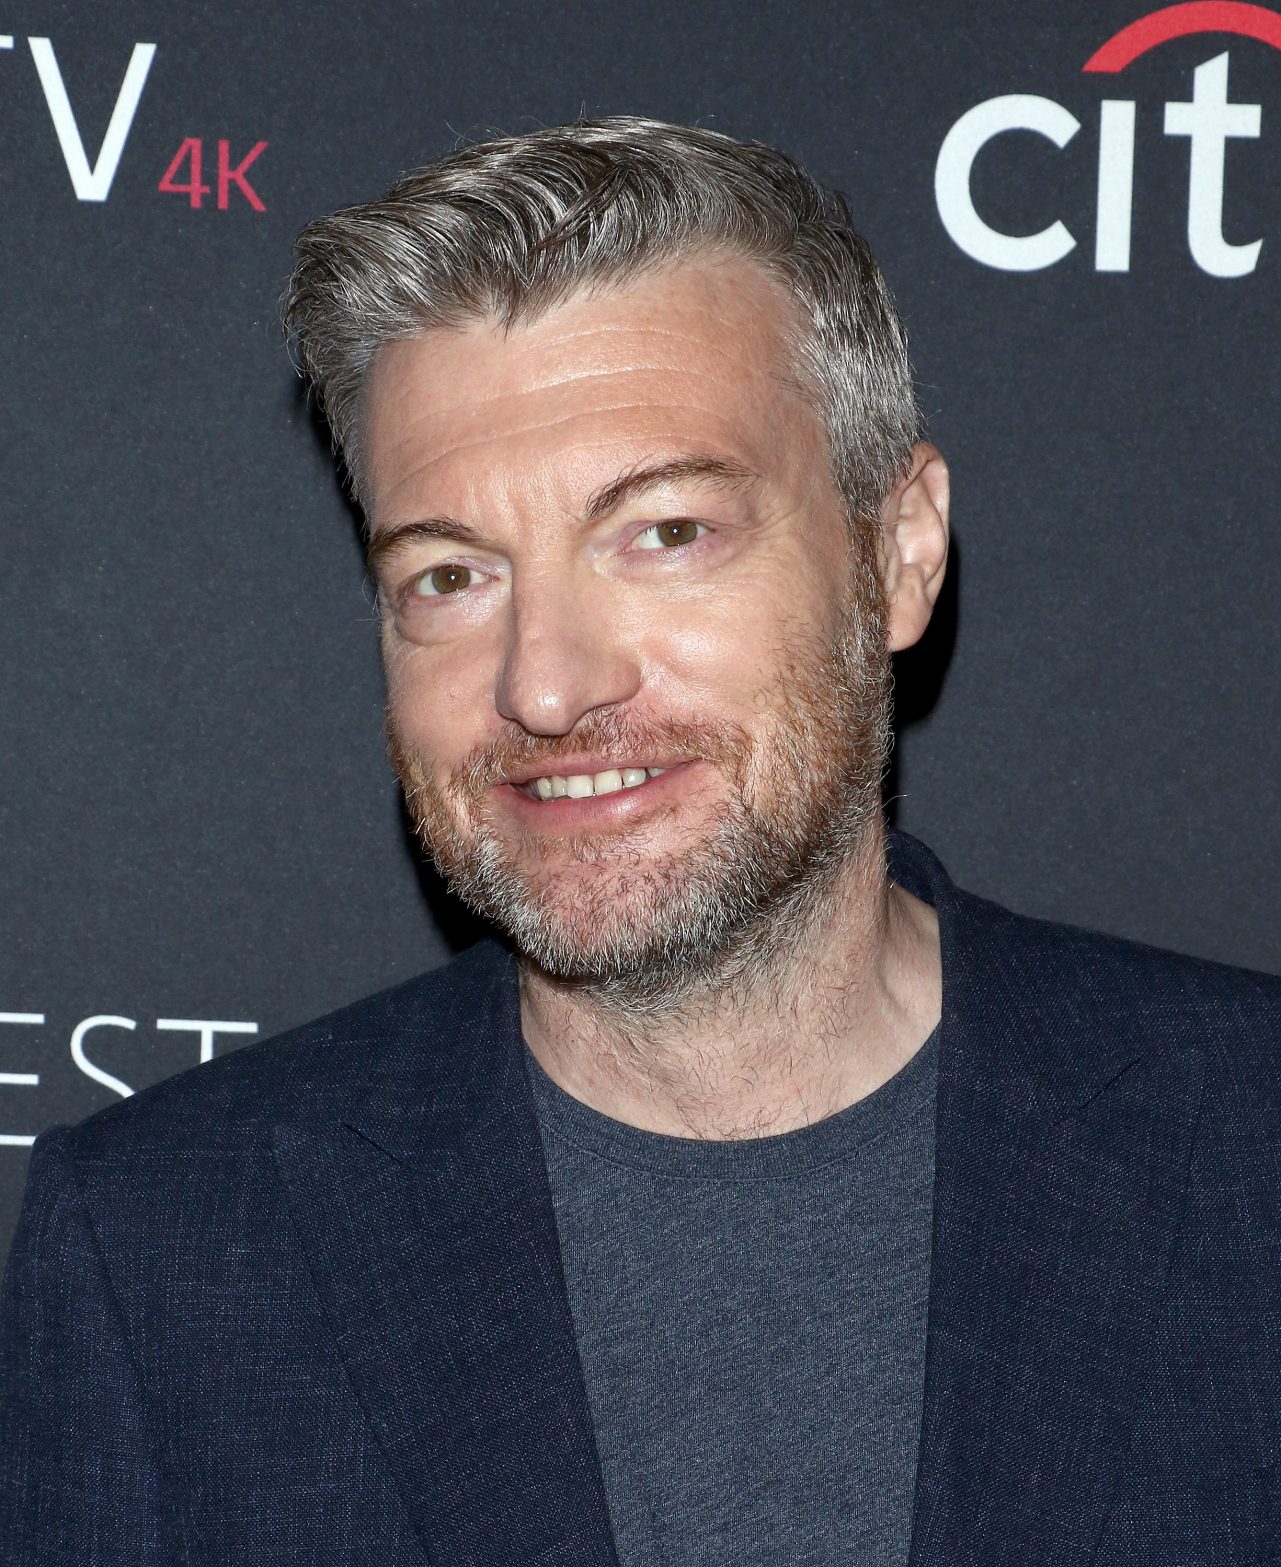 NEW YORK, NY - OCTOBER 06: Creator/executive producer Charlie Brooker attends the PaleyFest NY 2017 "Black Mirror" screening at The Paley Center for Media on October 6, 2017 in New York City.  (Photo by Jim Spellman/WireImage)